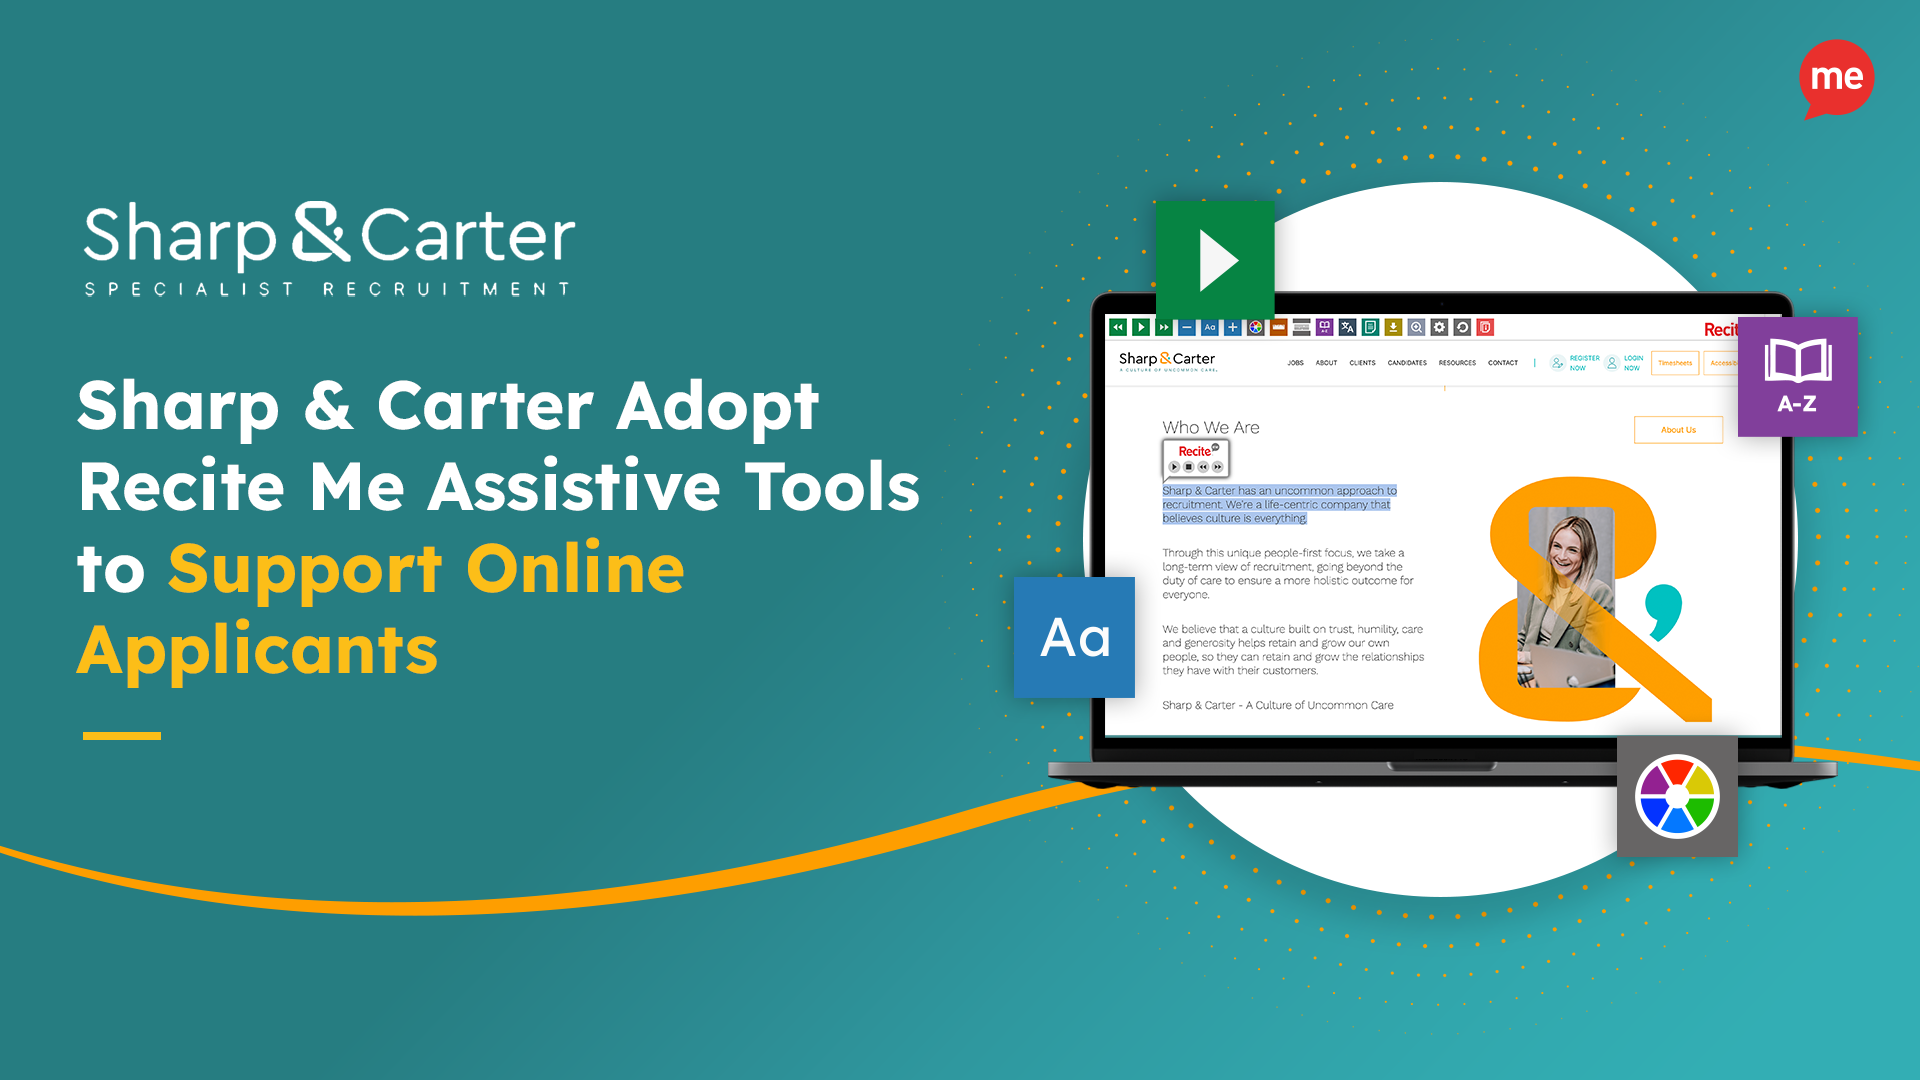 Sharp & Carter Adopt Recite Me Assistive Tools to Support Online Applicants